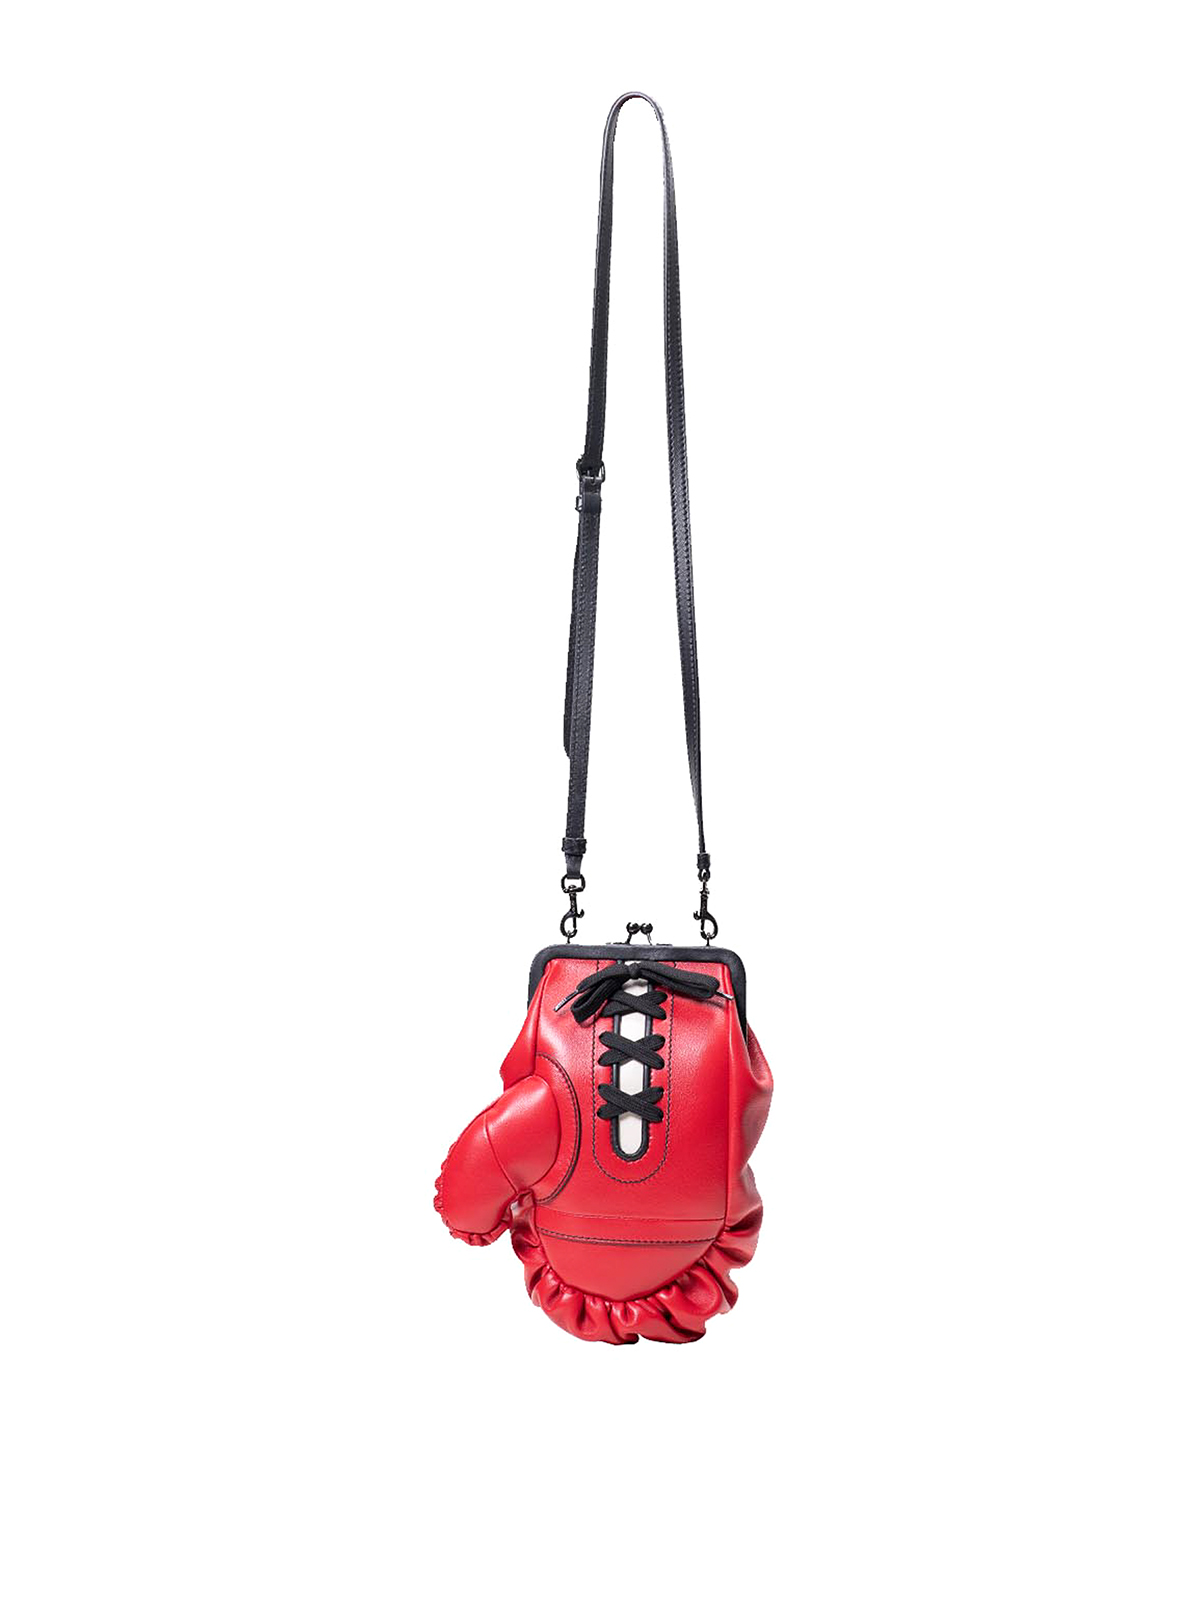 Moschino Boxing Glove Bag In Red